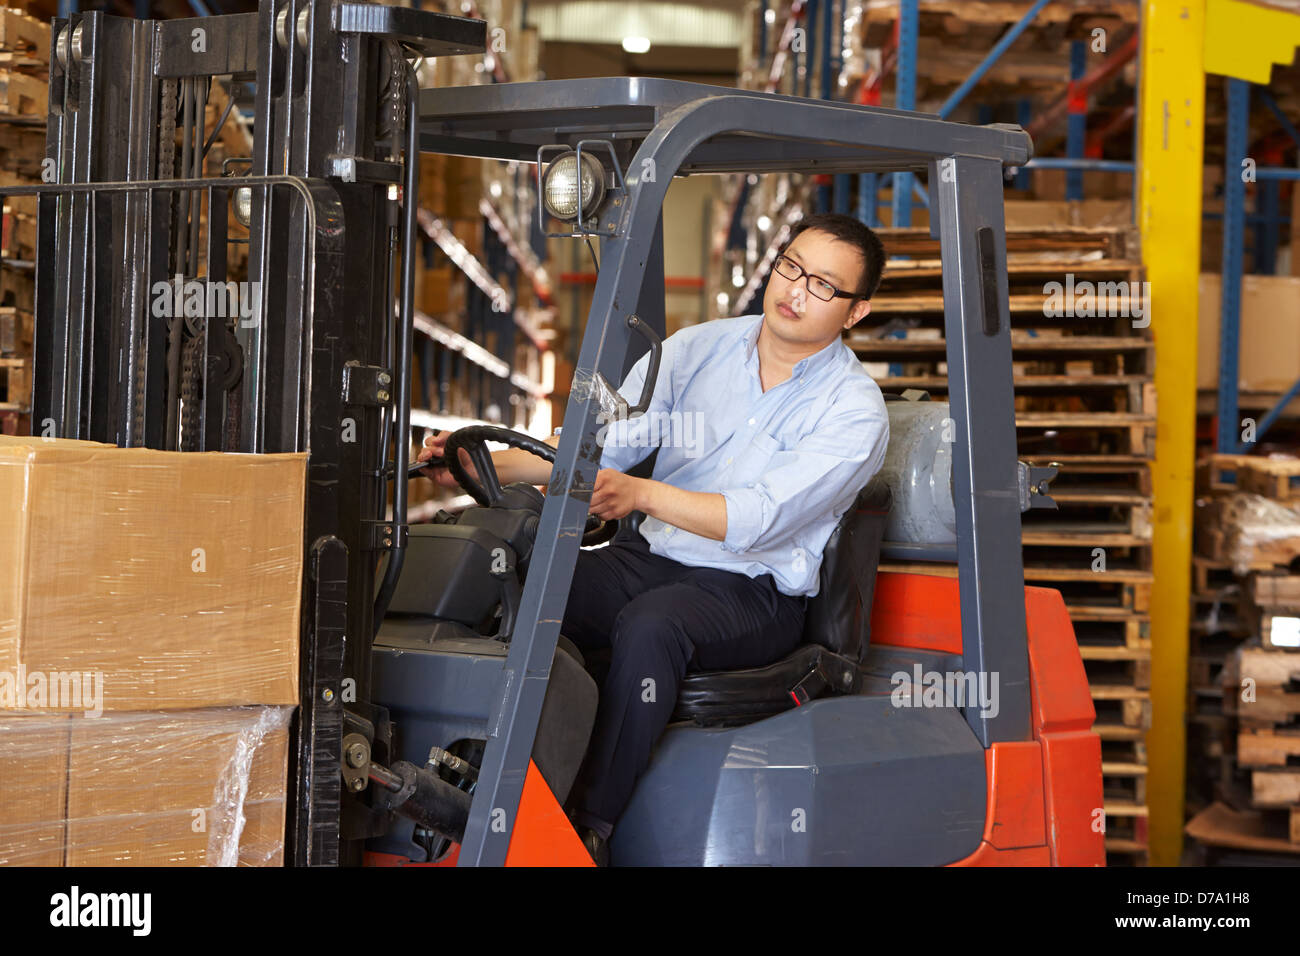 Man Driving Fork Lift Truck In Warehouse Stock Photo